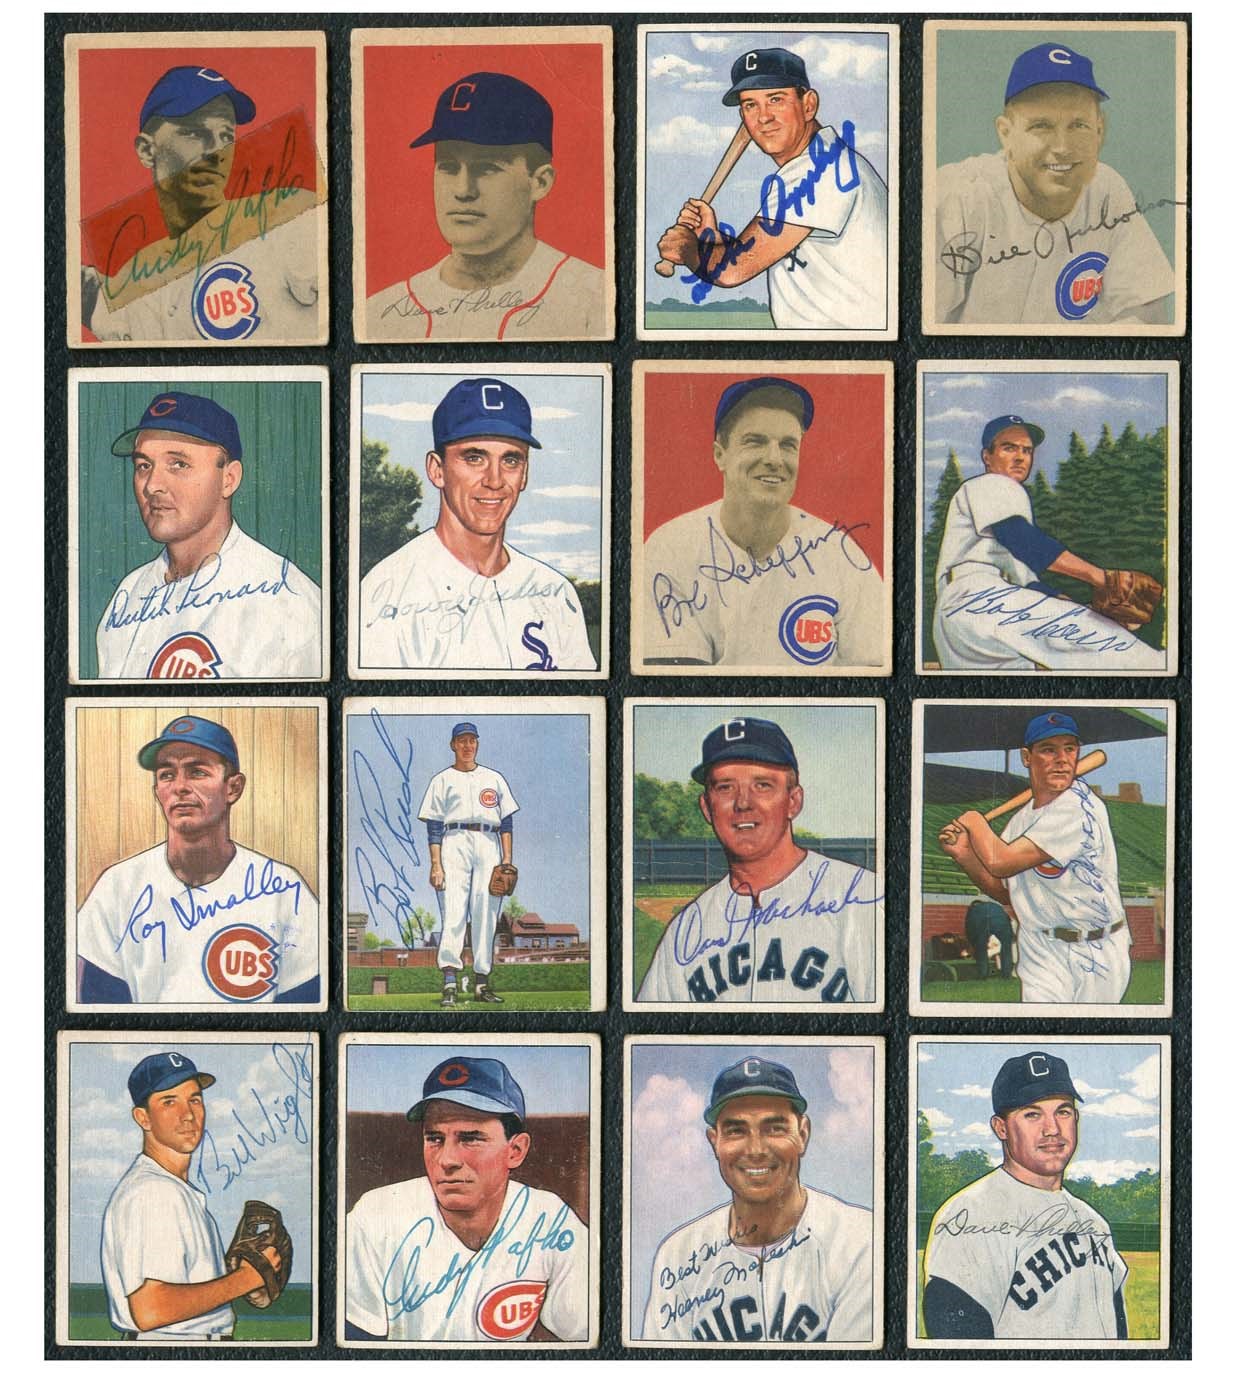 1933-52 Chicago Cubs & White Sox Goudey, Diamond Star & Bowman Signed Card Collection (101)